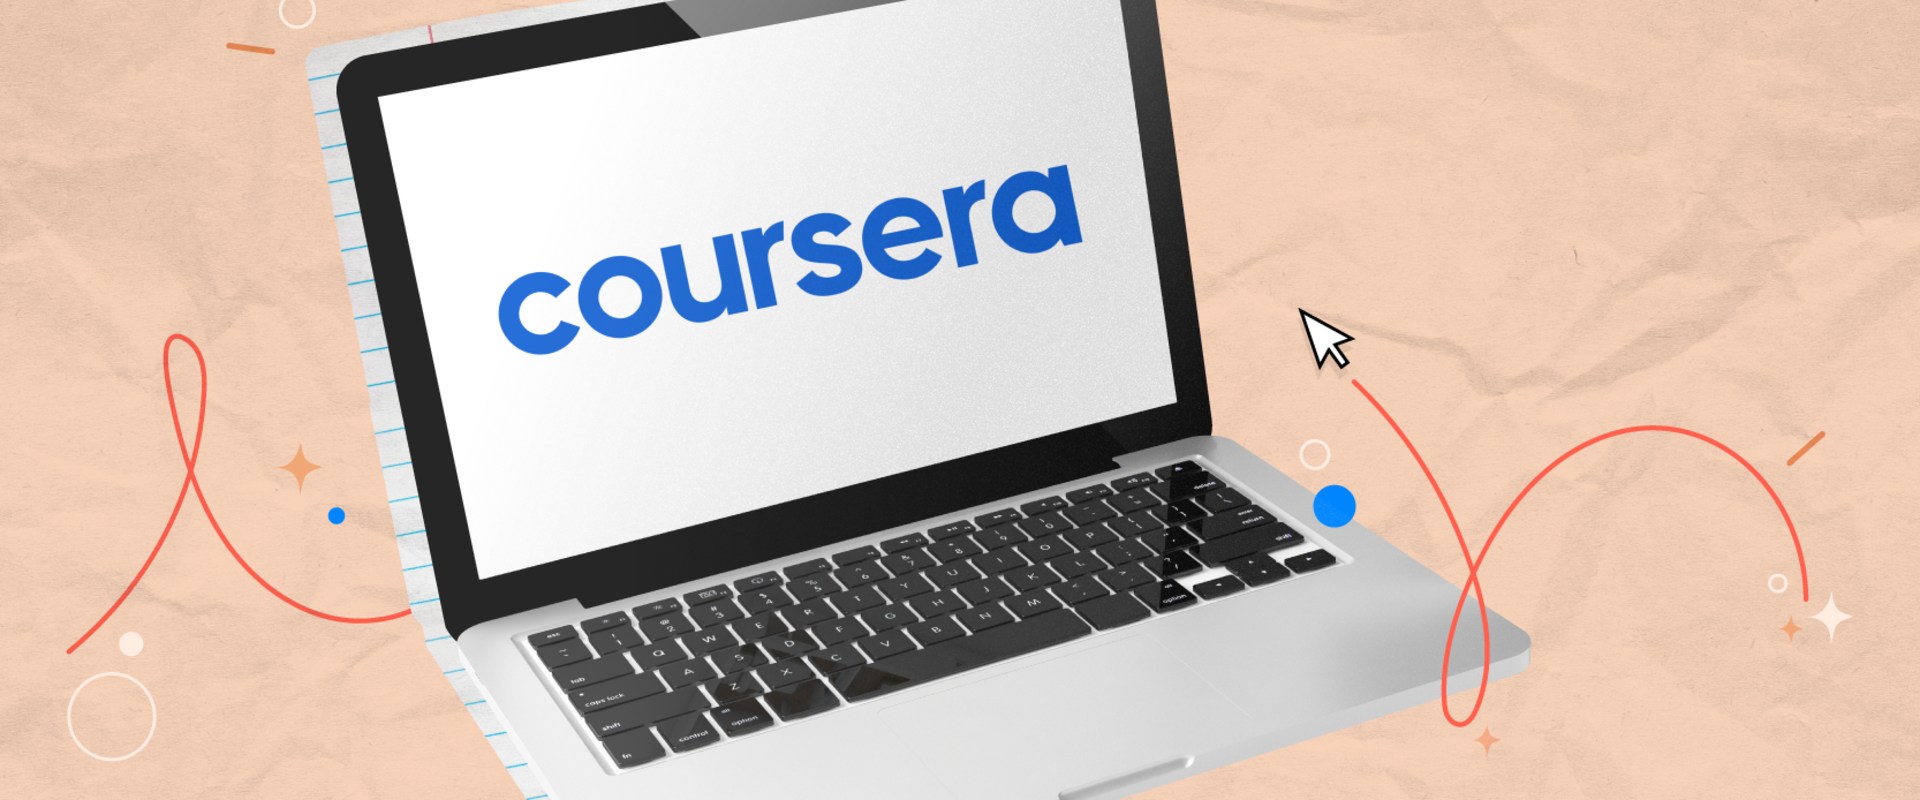 Exploring Coursera: An Overview of Self Improvement and Online Courses